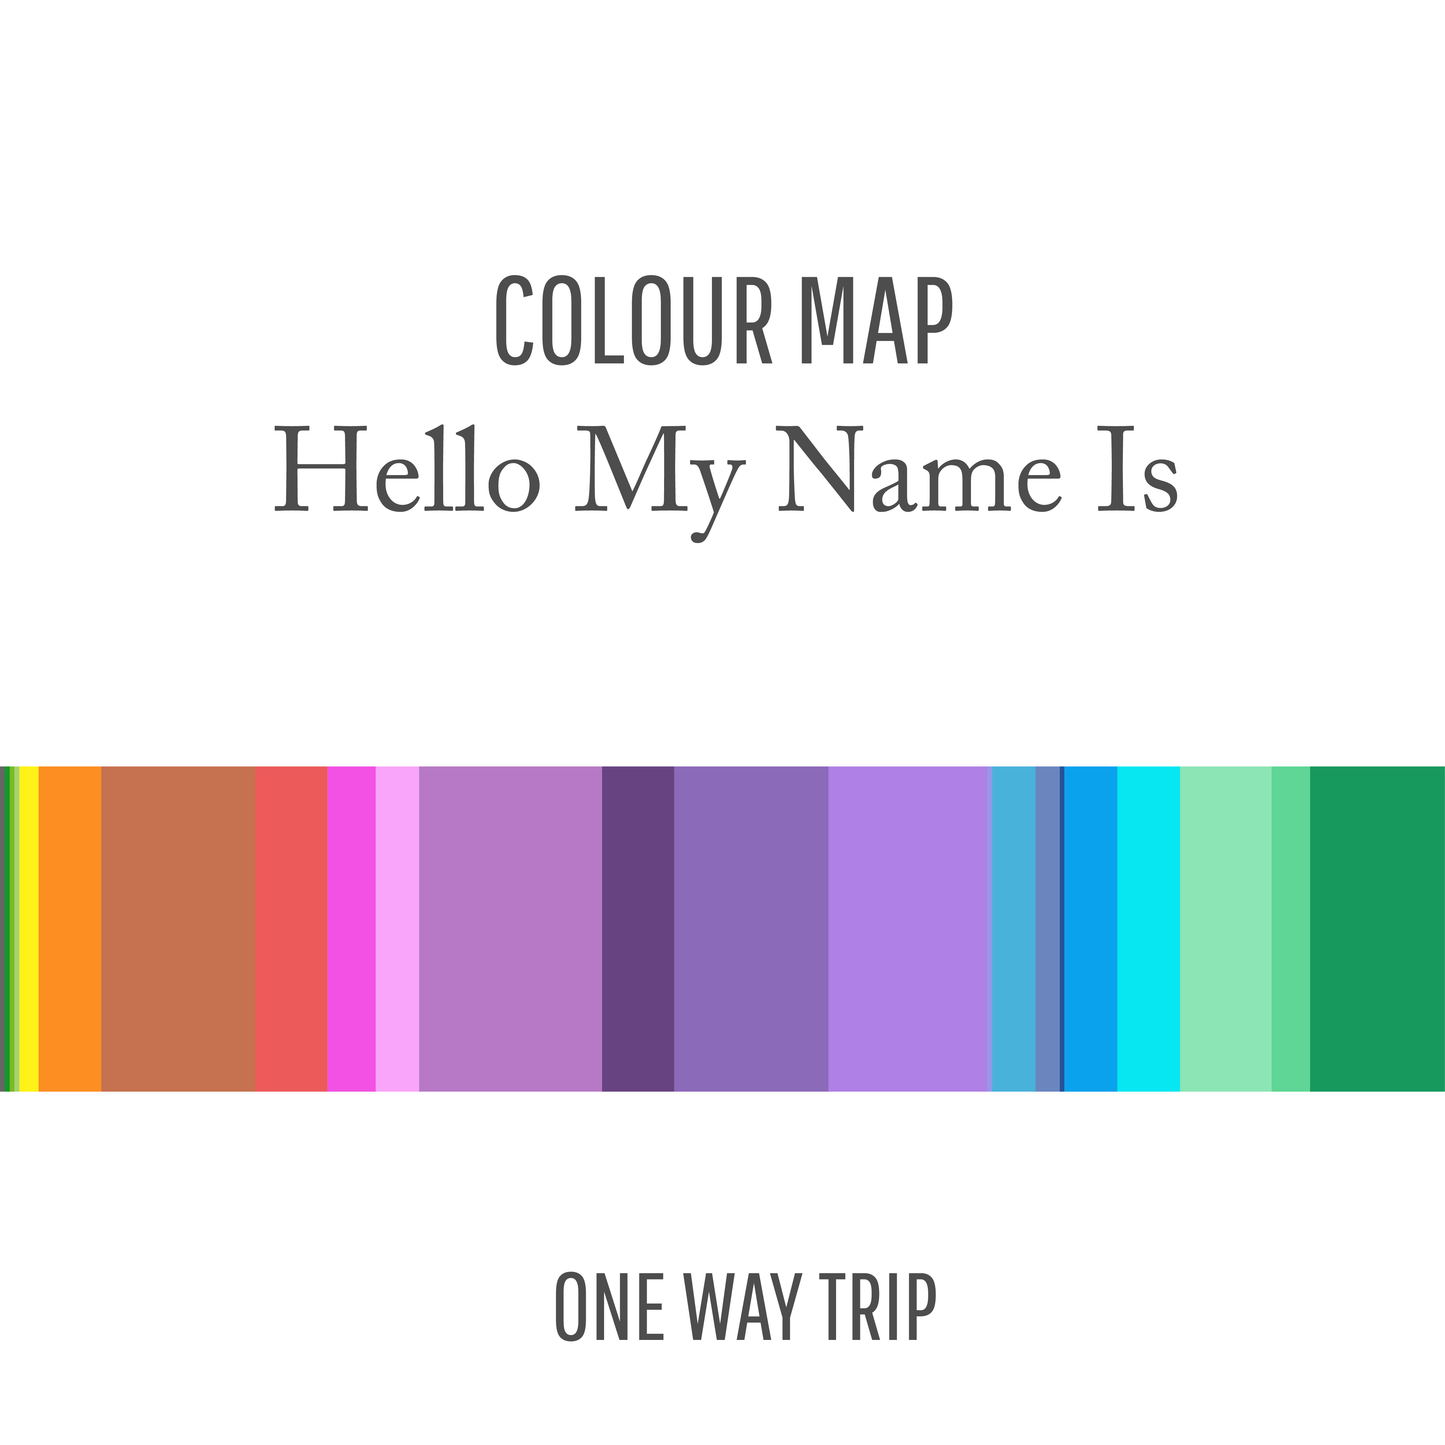 Hello My Name Is : One Way Trip